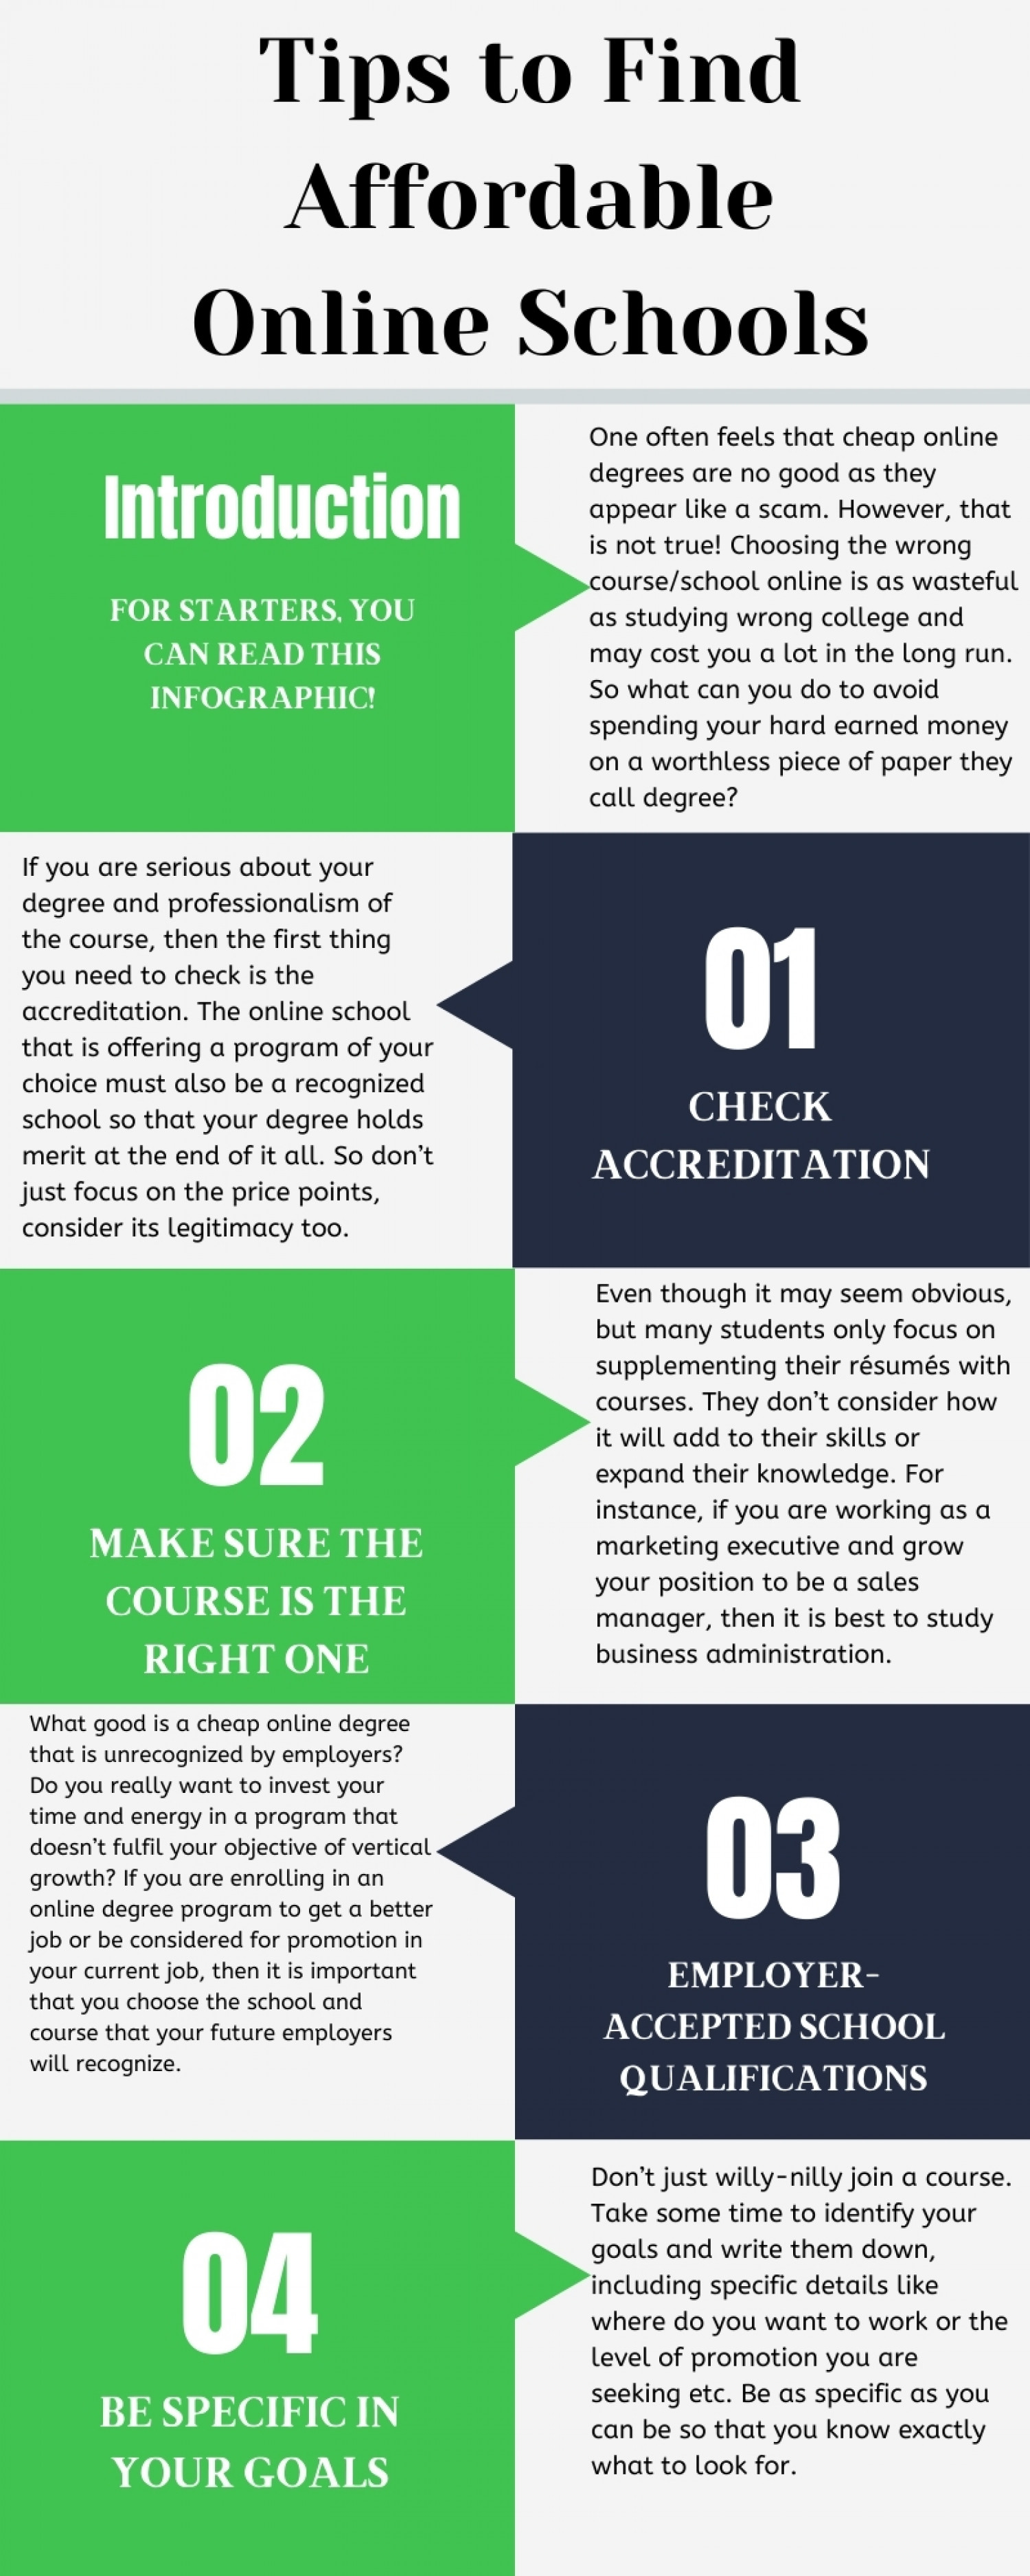 Tips to Find Affordable Online Schools Infographic